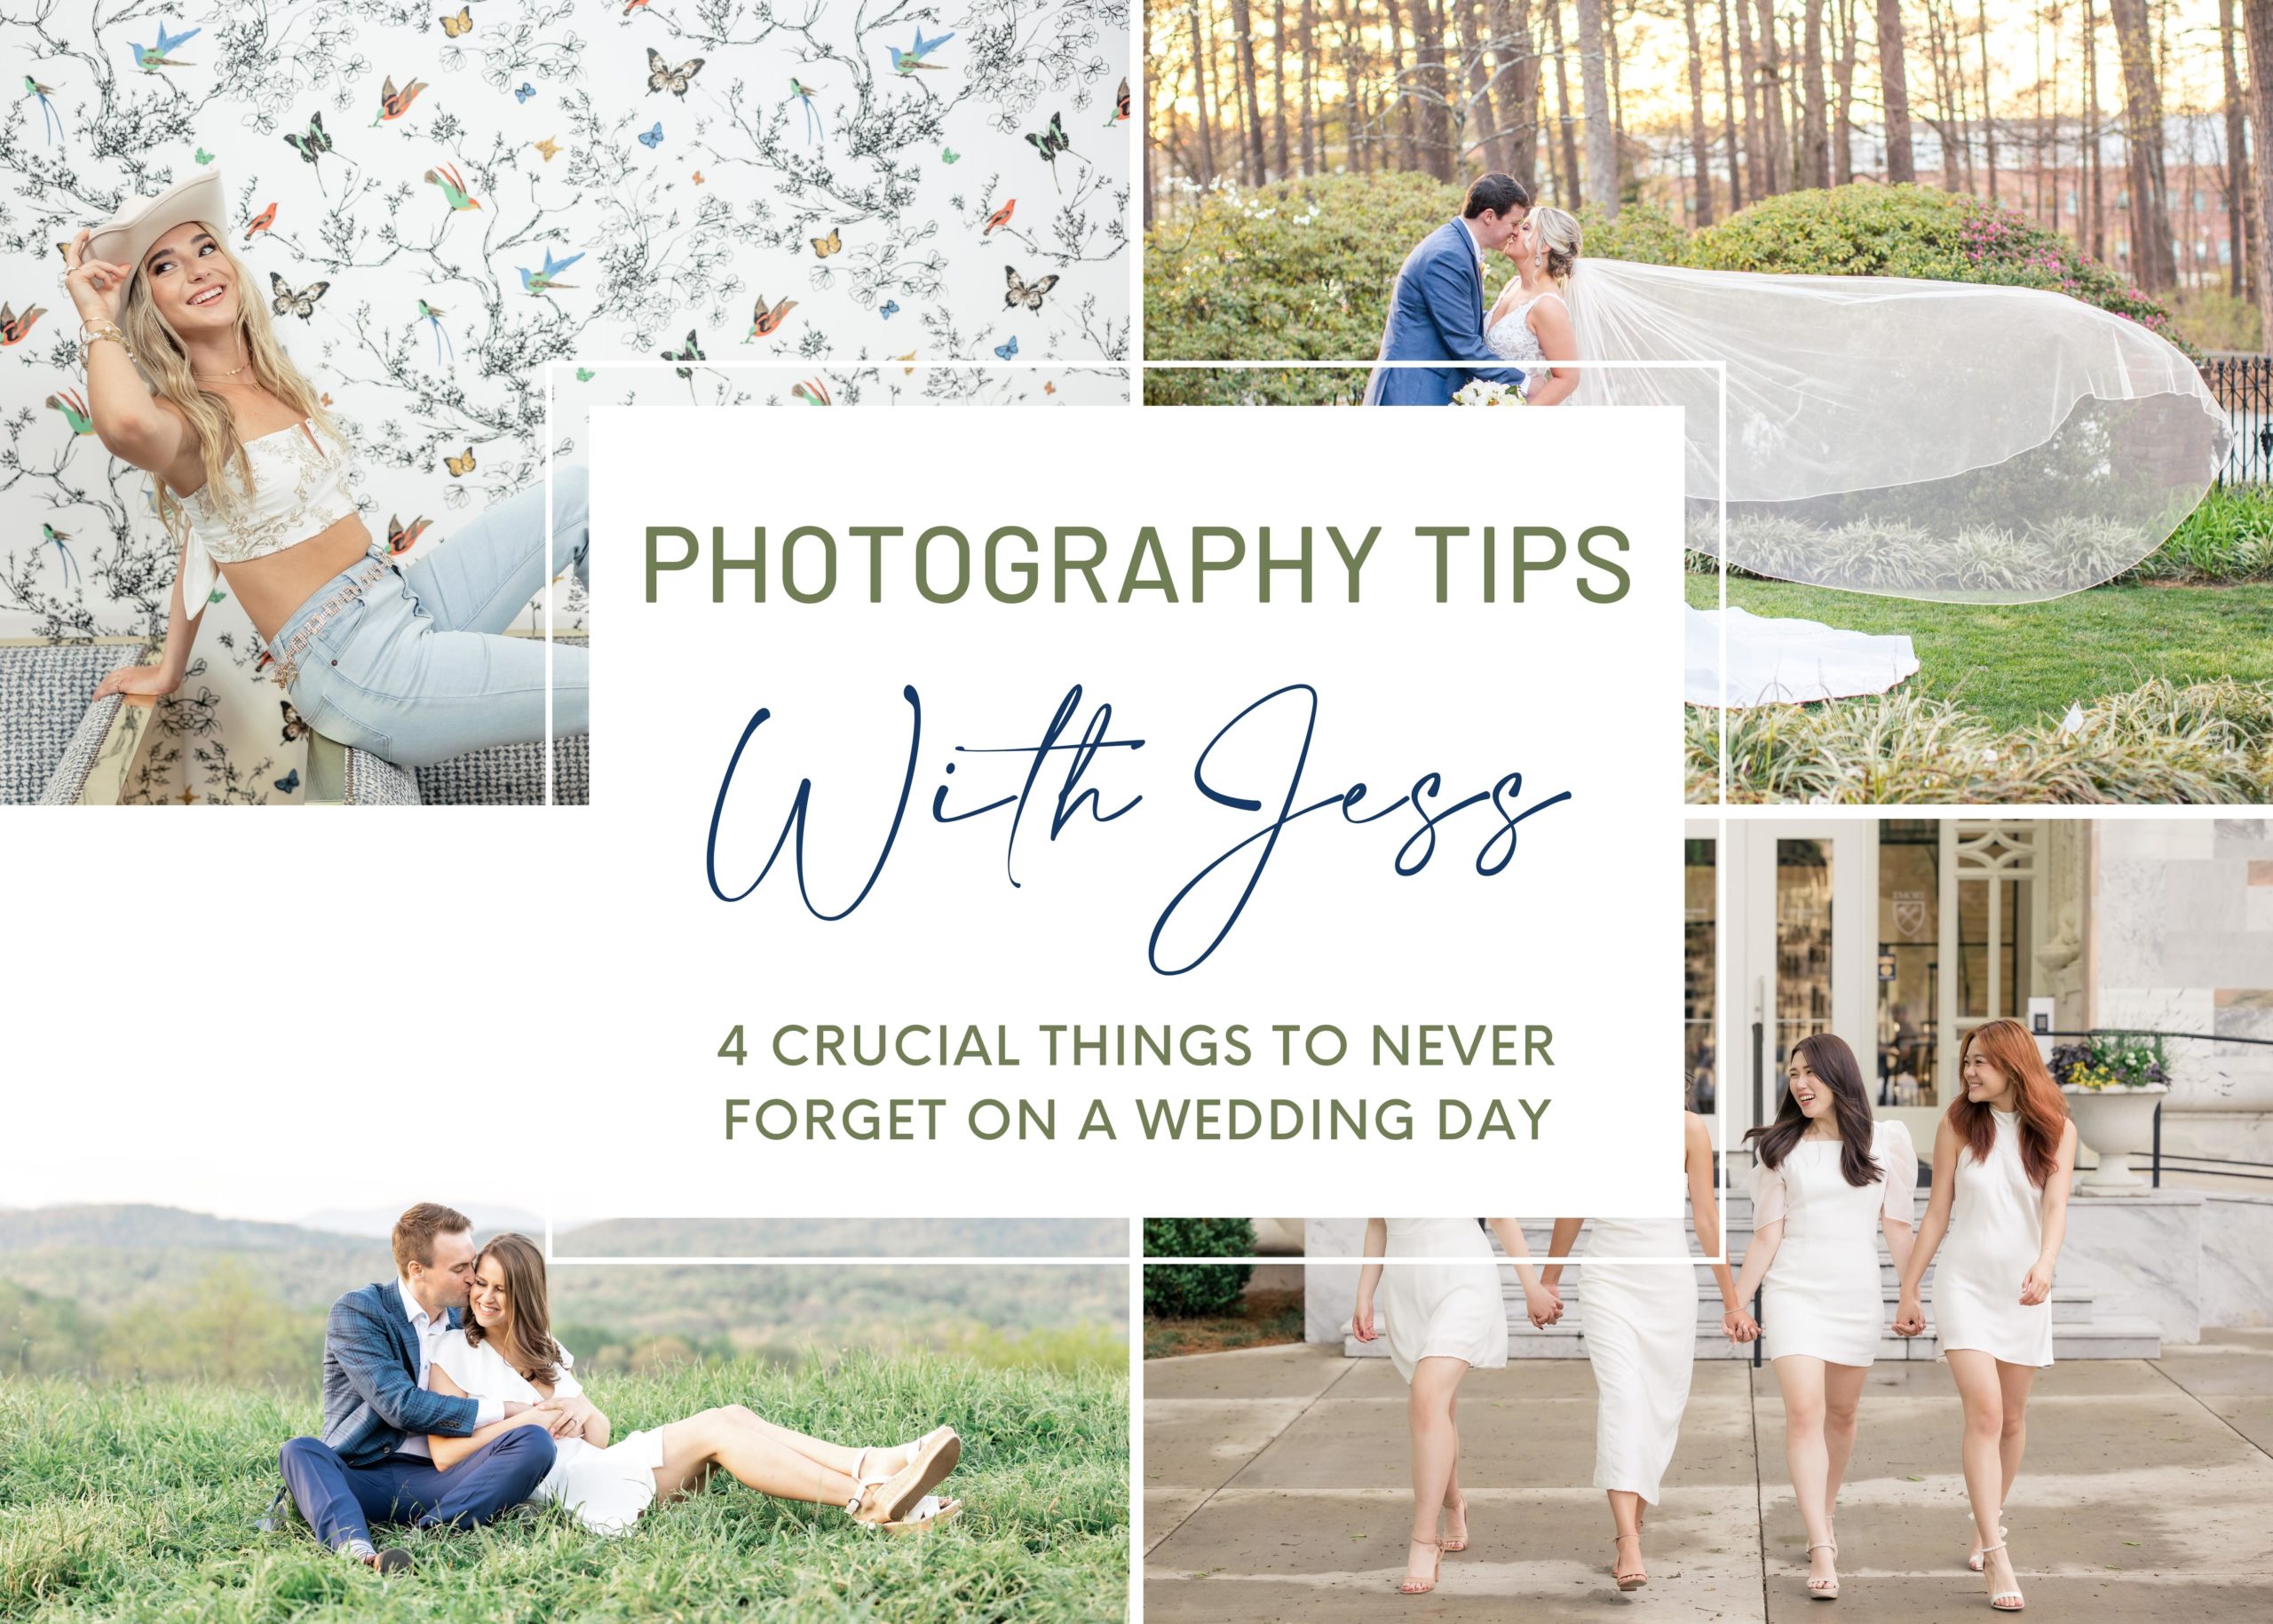 Photography Tips, 4 crutial items to never forget when shooting weddings